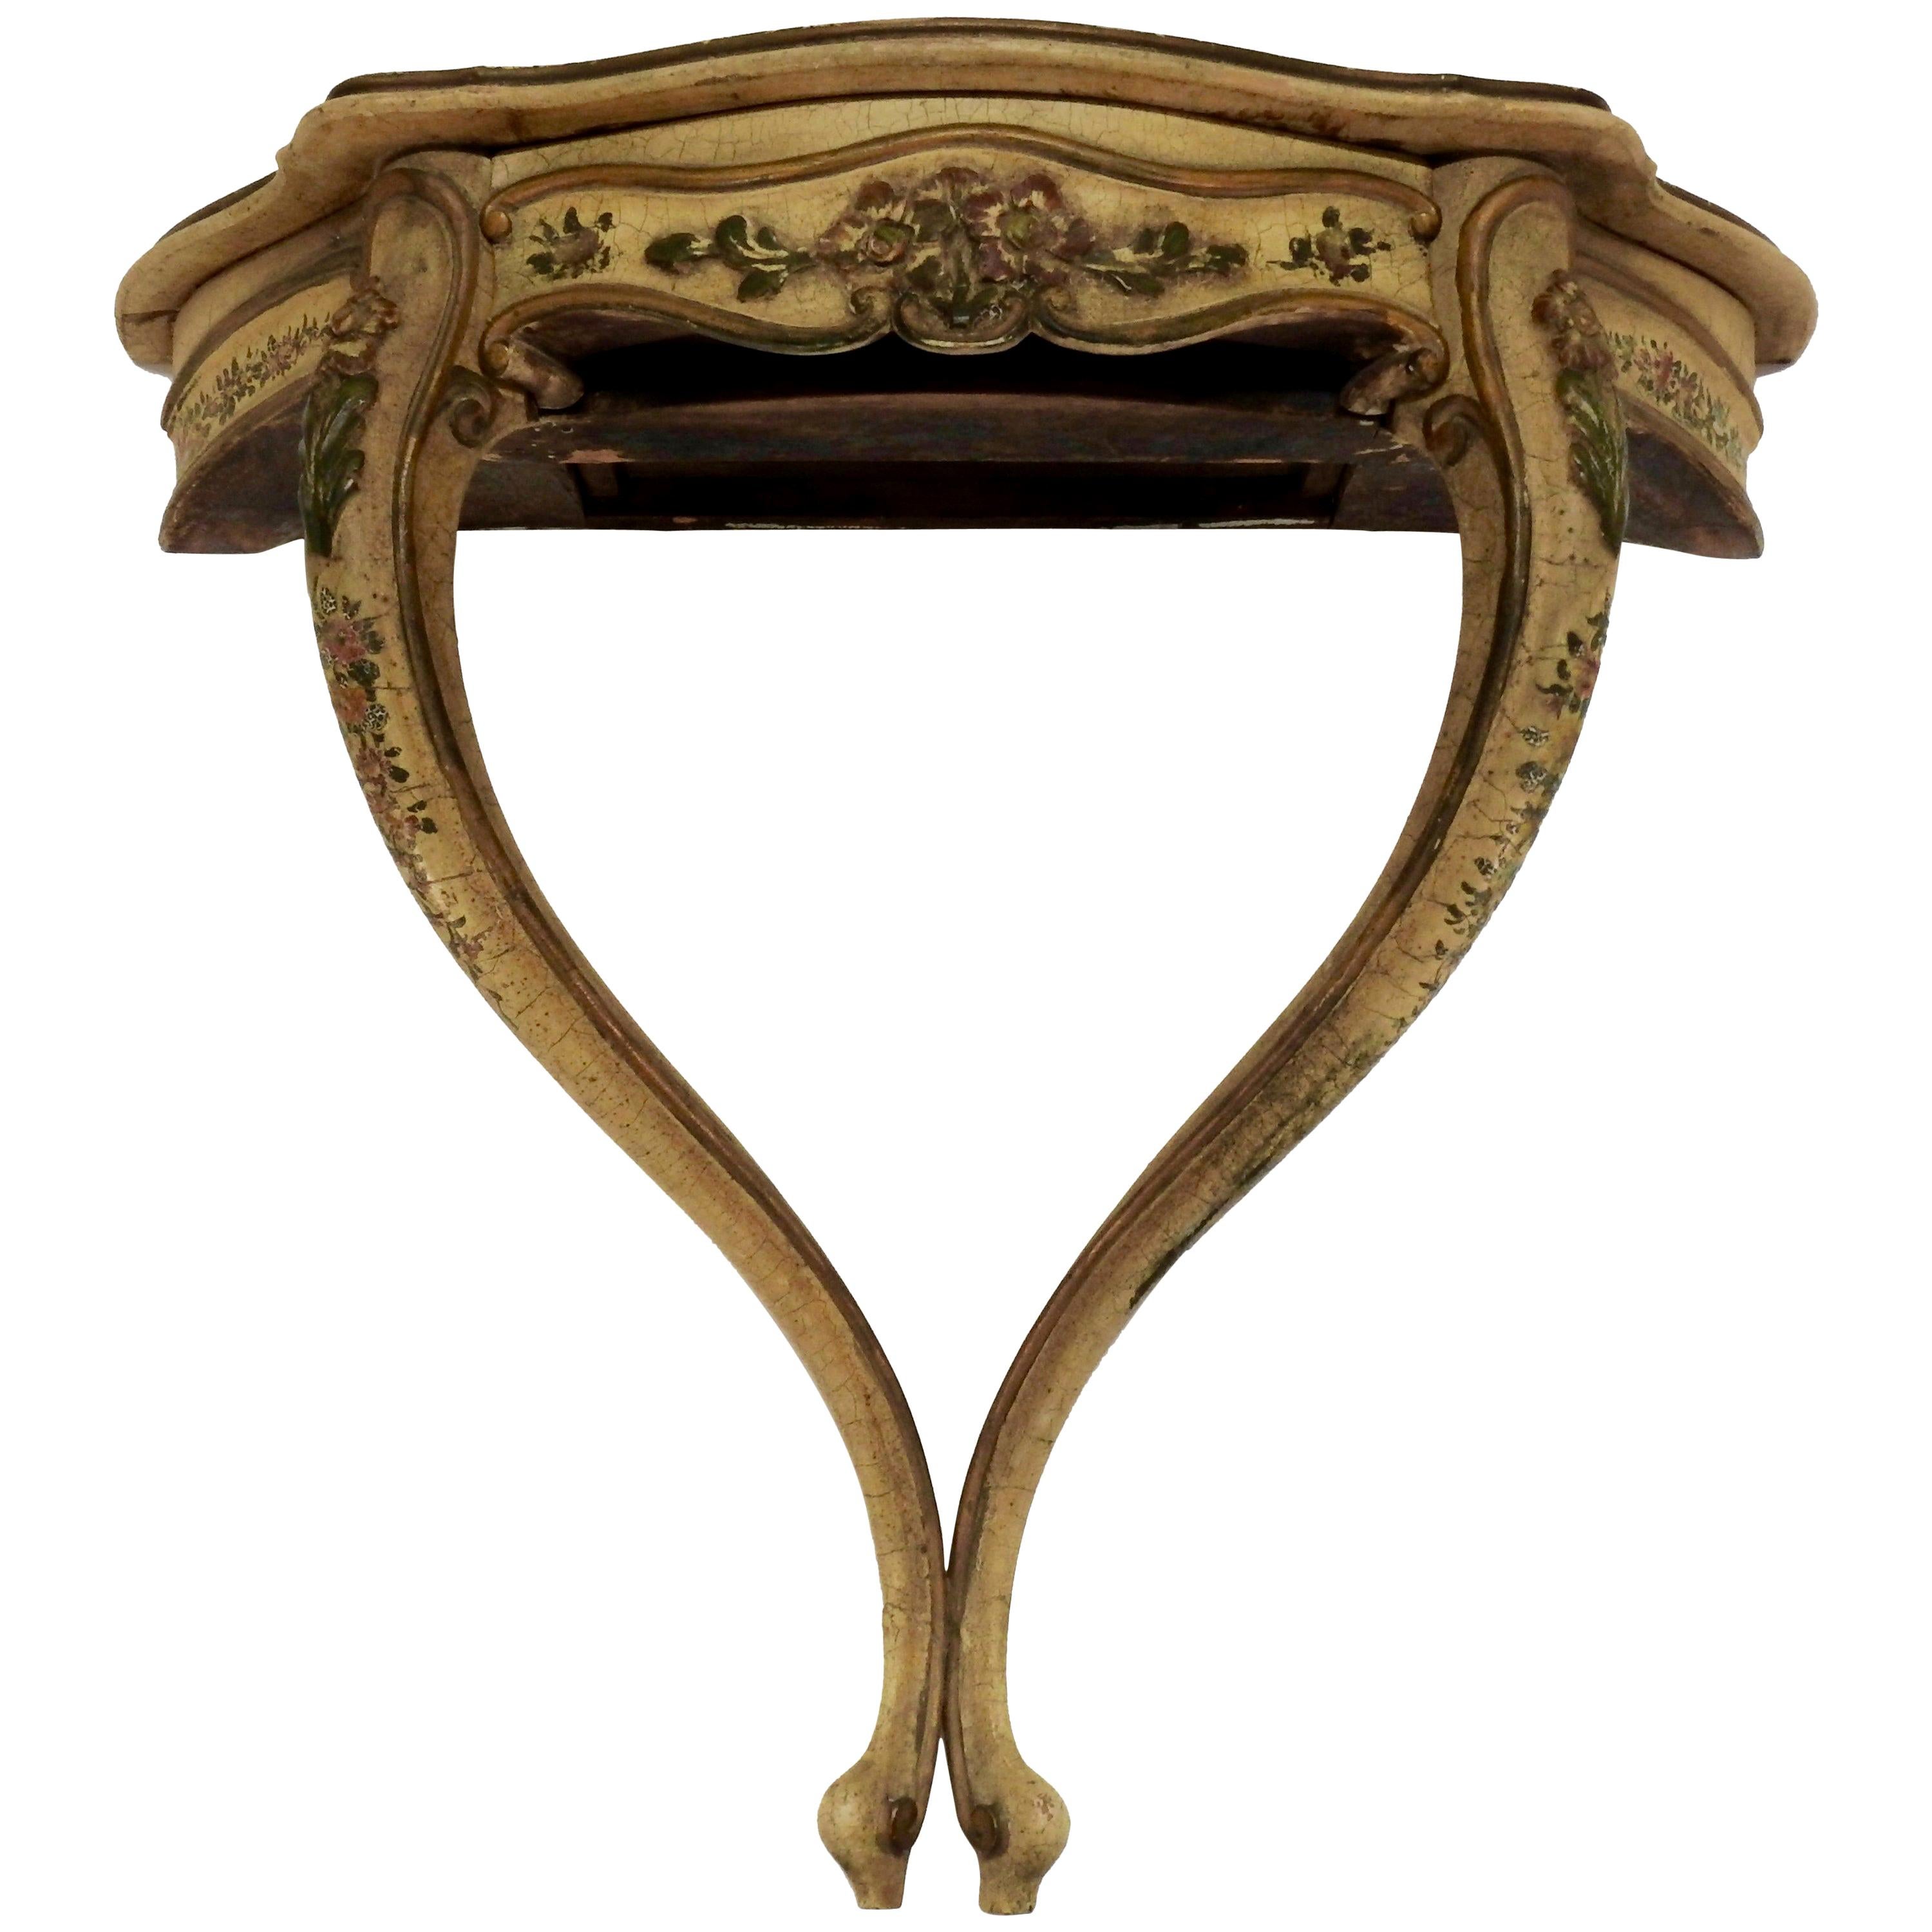 French One Drawer Bracket Shelf with Floral Details